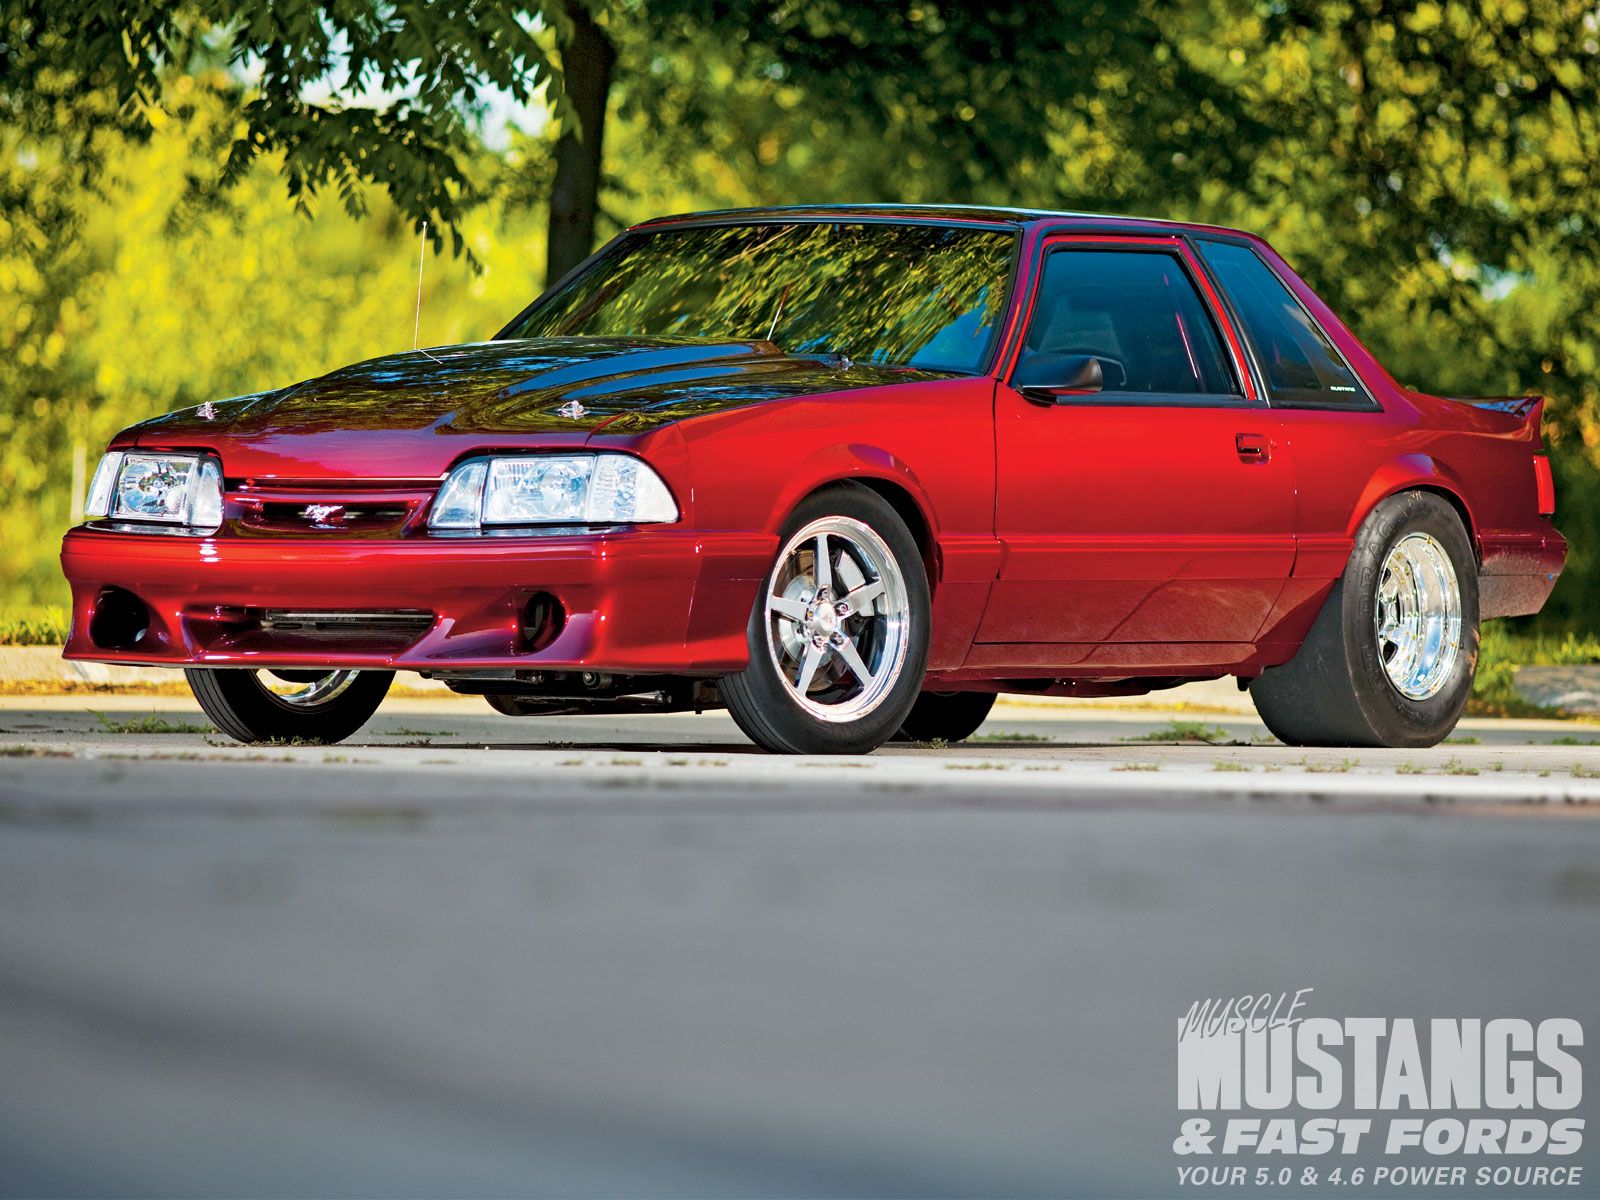 Ford Mustang LX Coupe Expense Spared Photo & Image Gallery